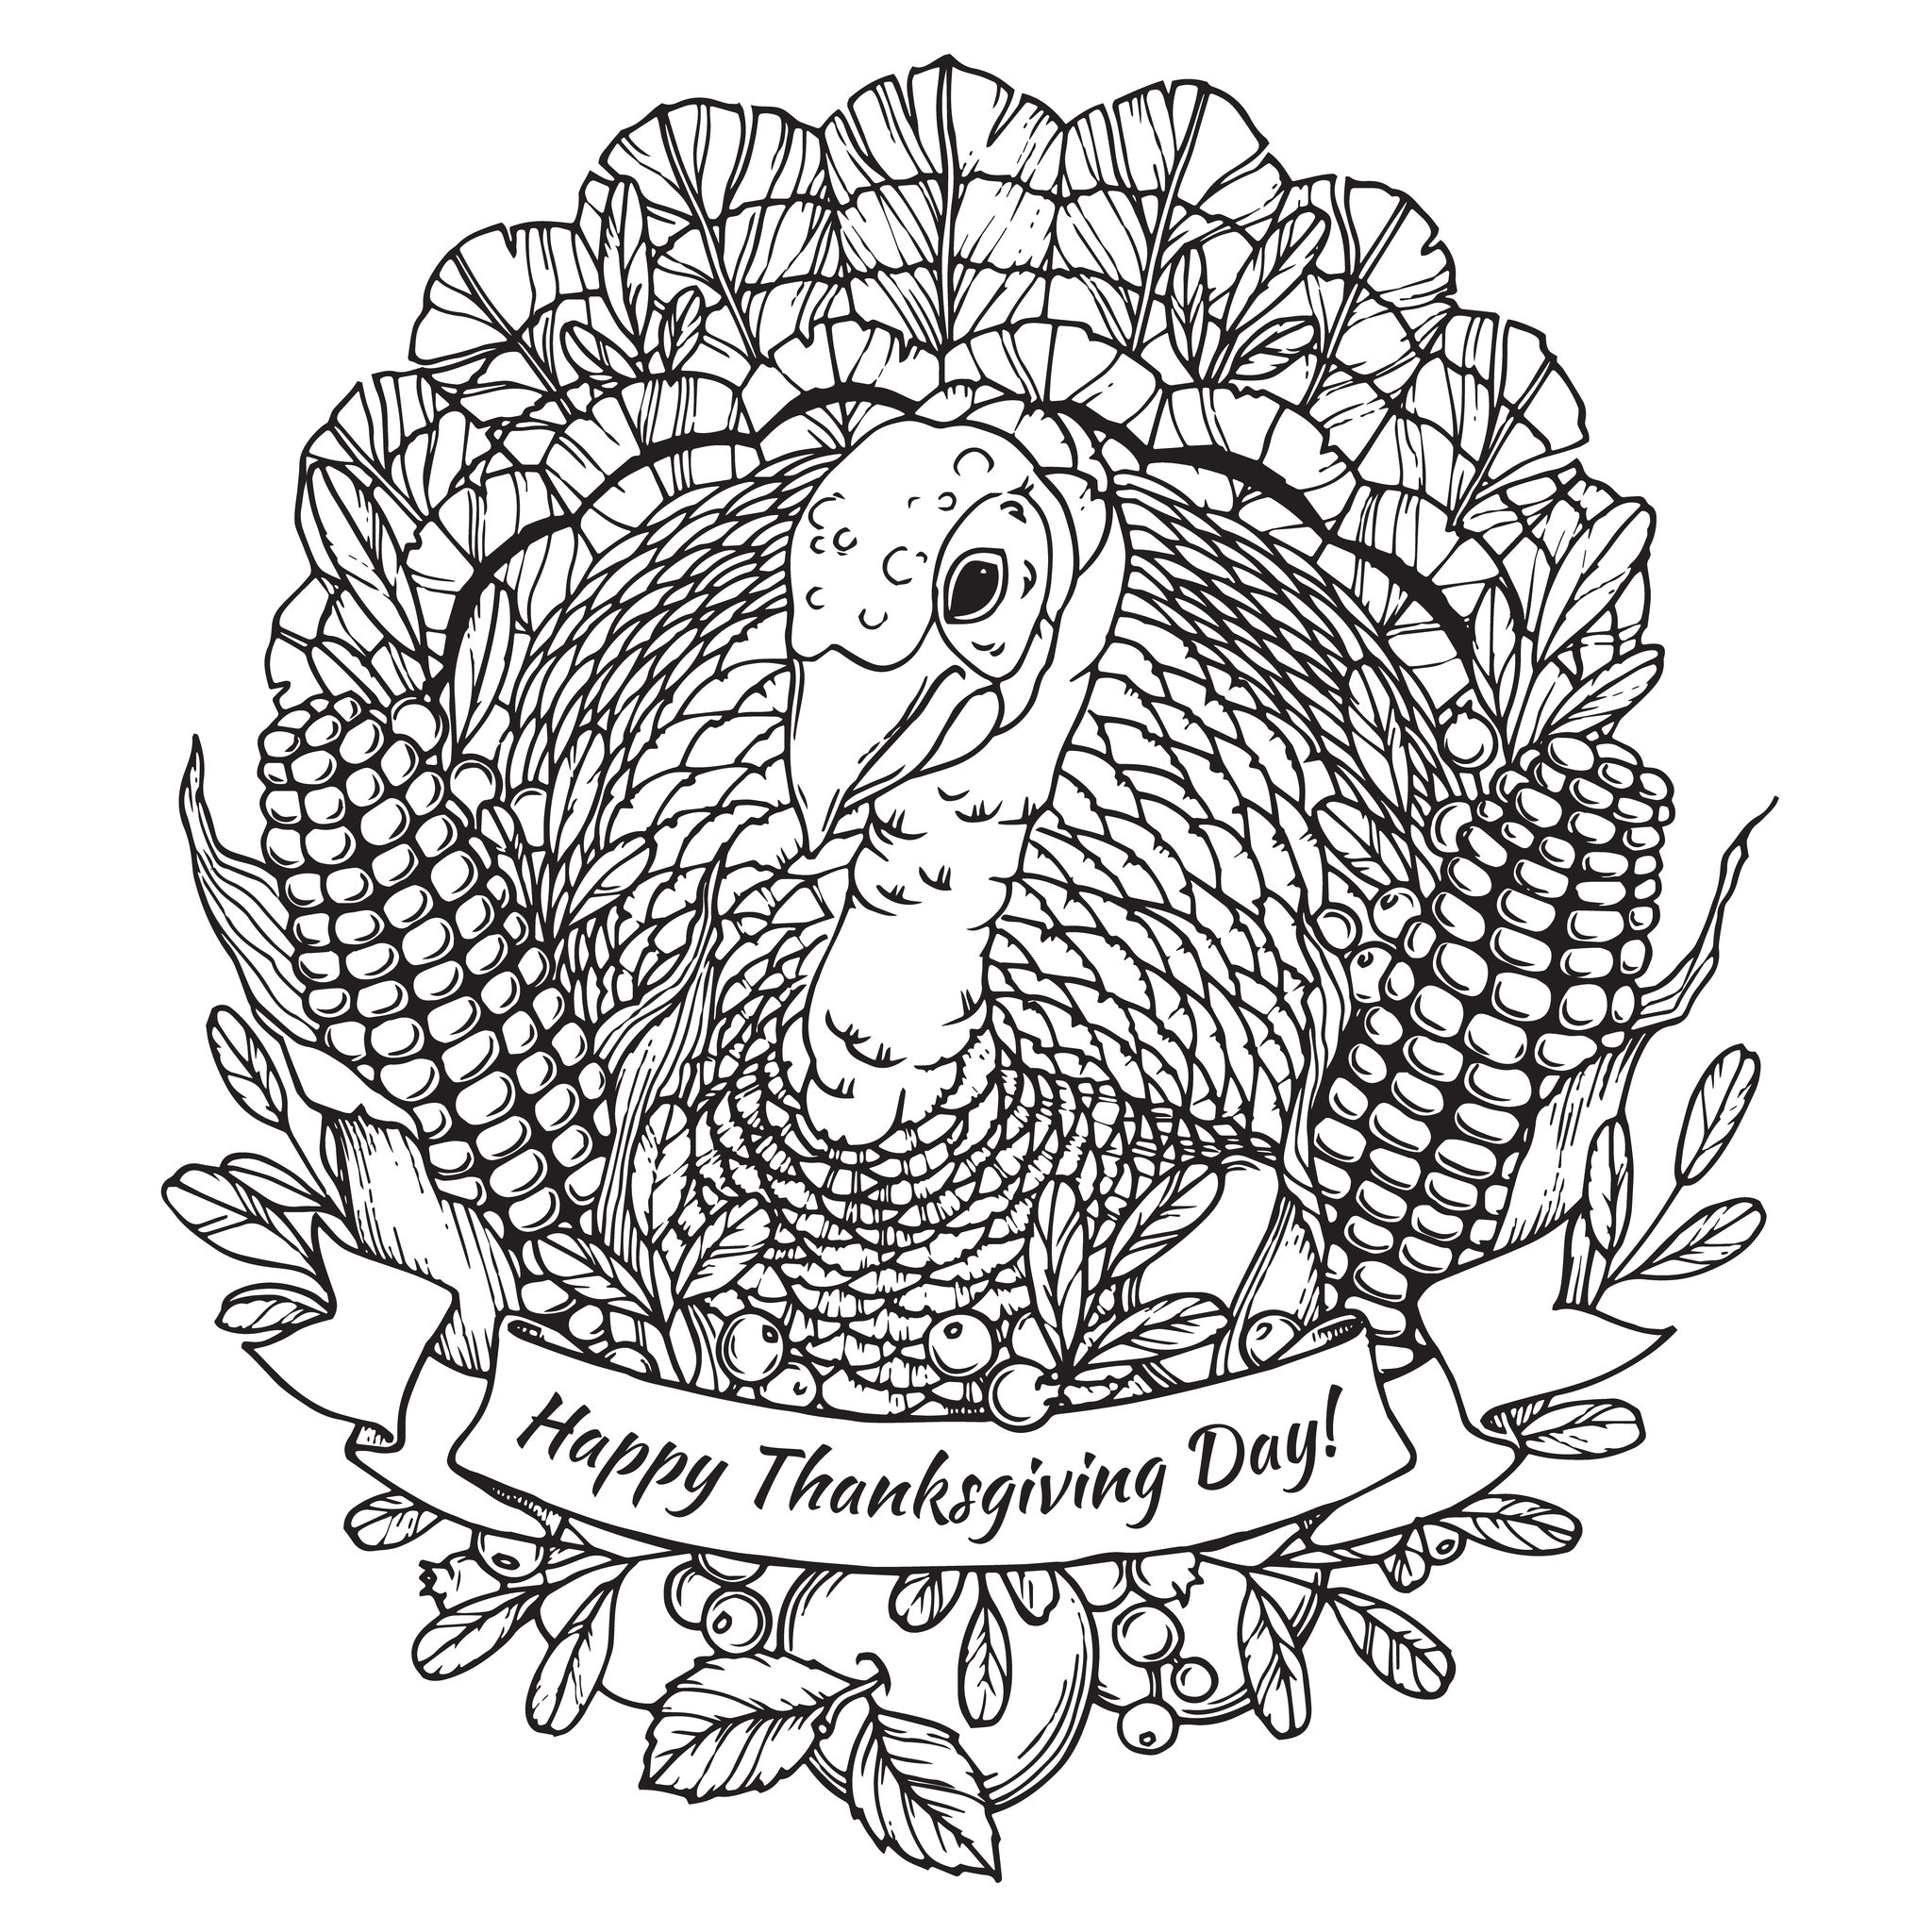 59191579 - thanksgiving day greeting card with turkey, vegetables and fruits in cartoon style. black and white